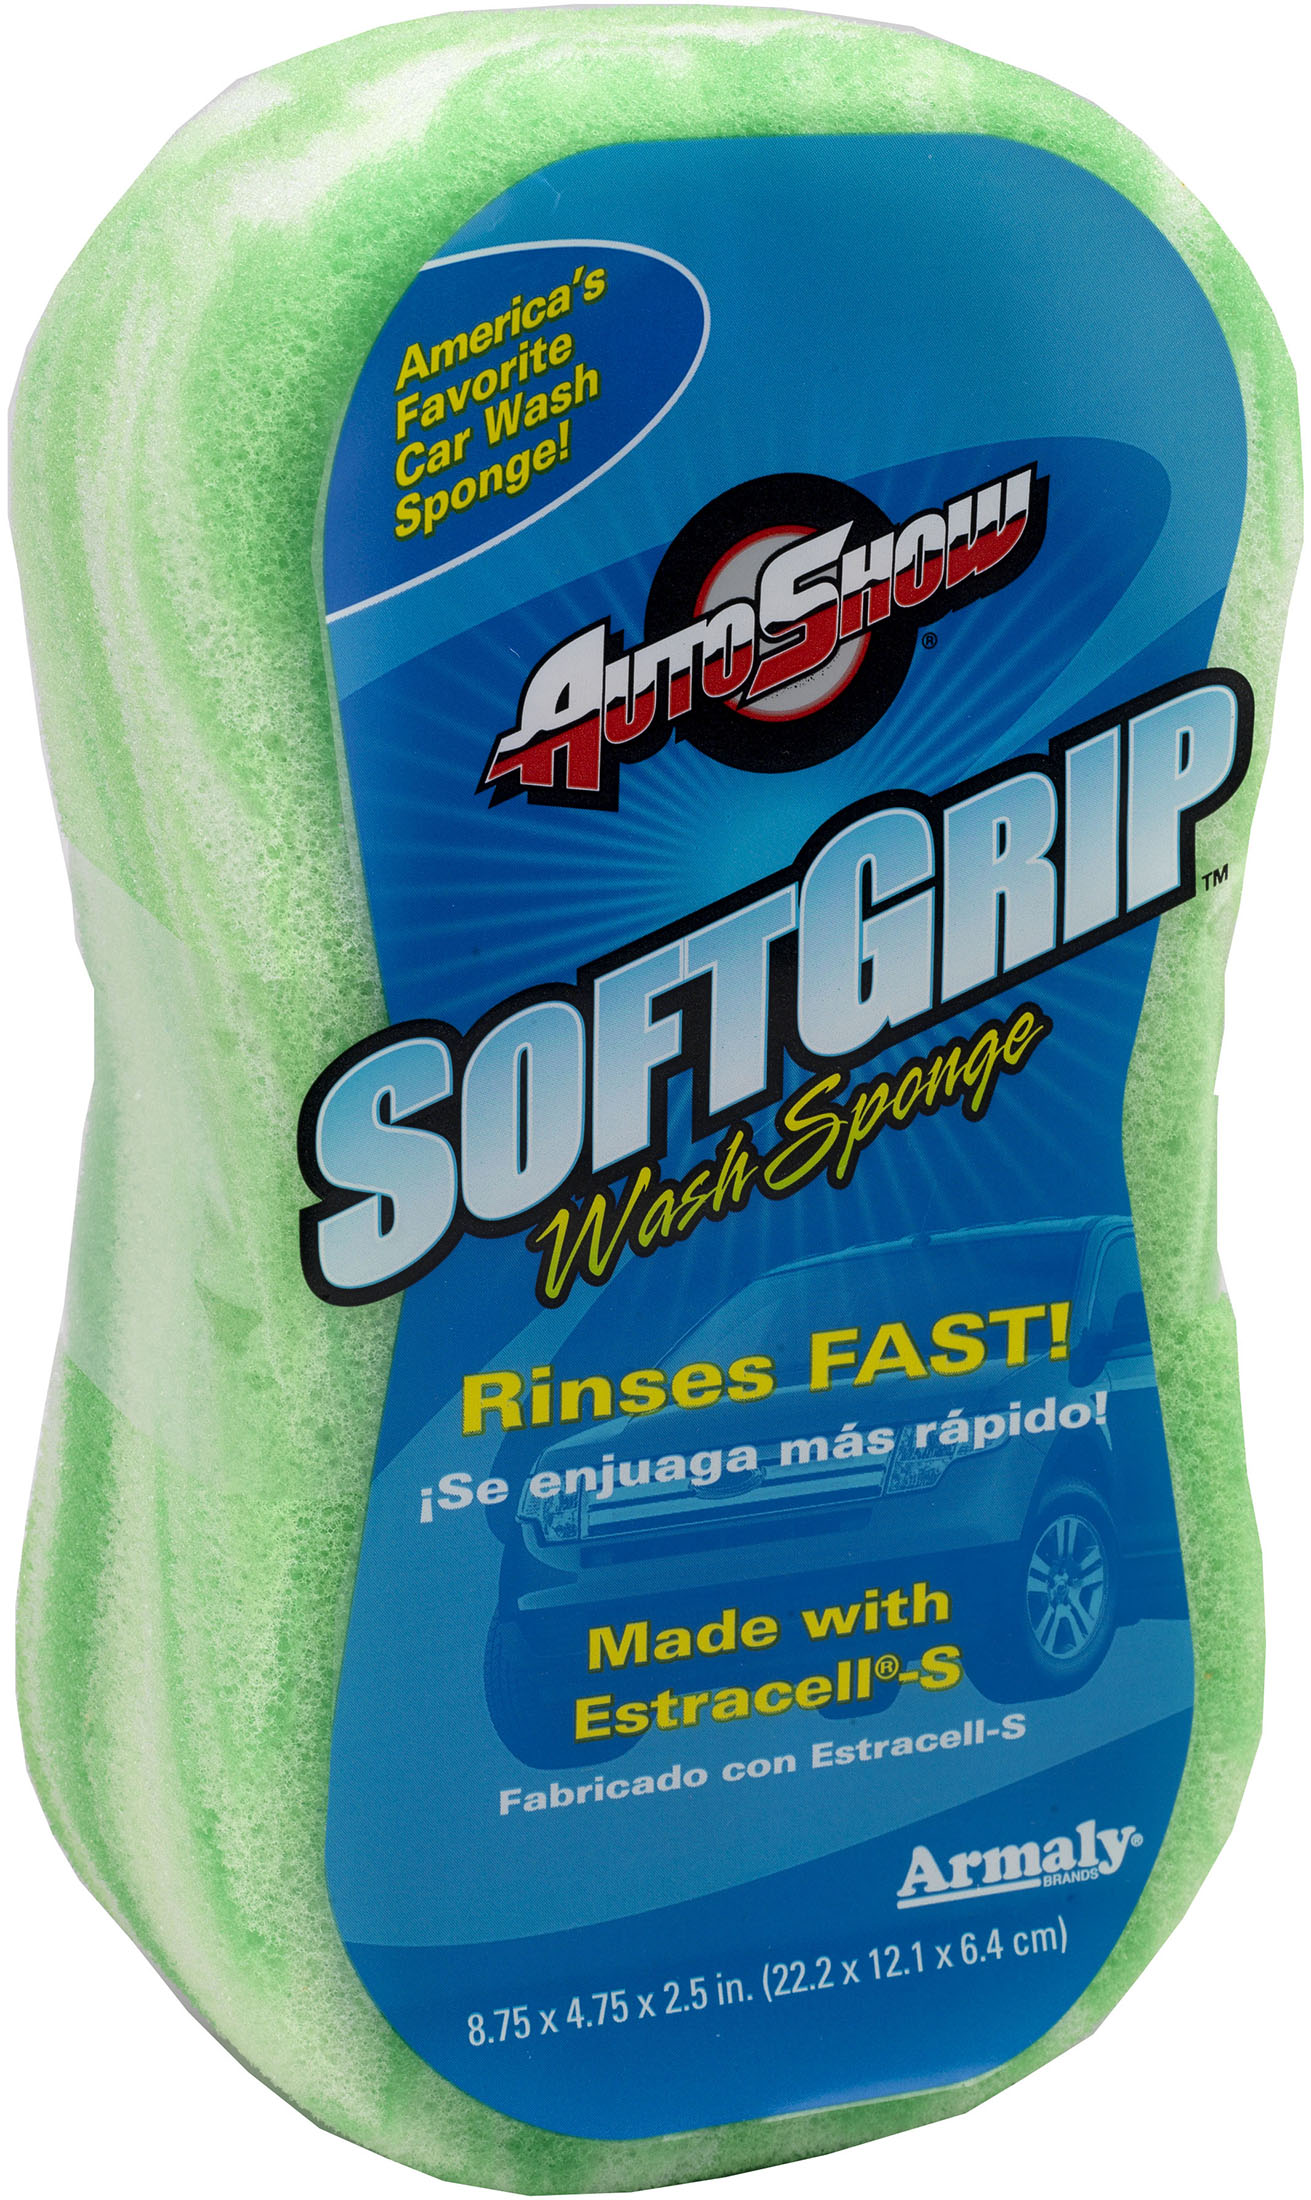 AutoShow Estracell-S Exterior Wash Sponge Assorted Colors - image 1 of 2